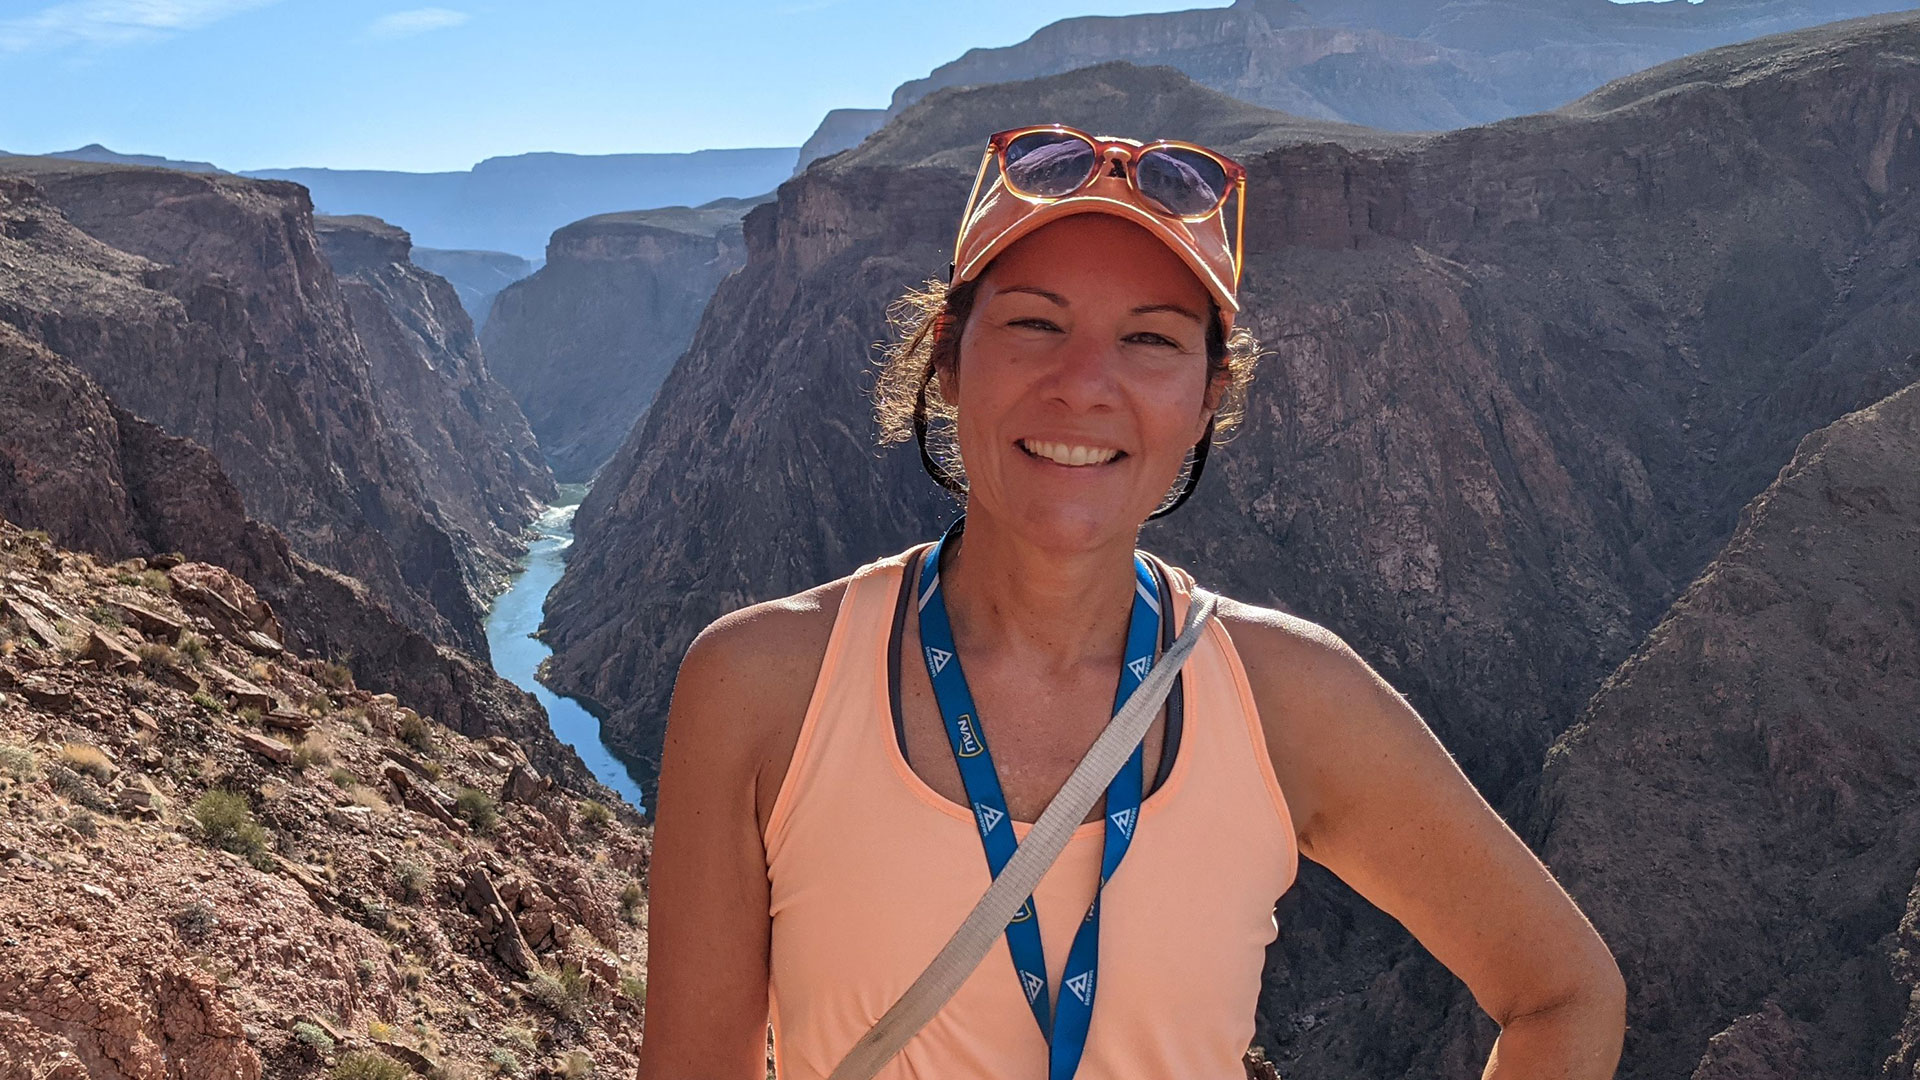 In this photo, Lori is standing in front of the steep, rugged chasm of the Grand Canyon, with the blue Colorado River below. She's wearing light hiking clothes.